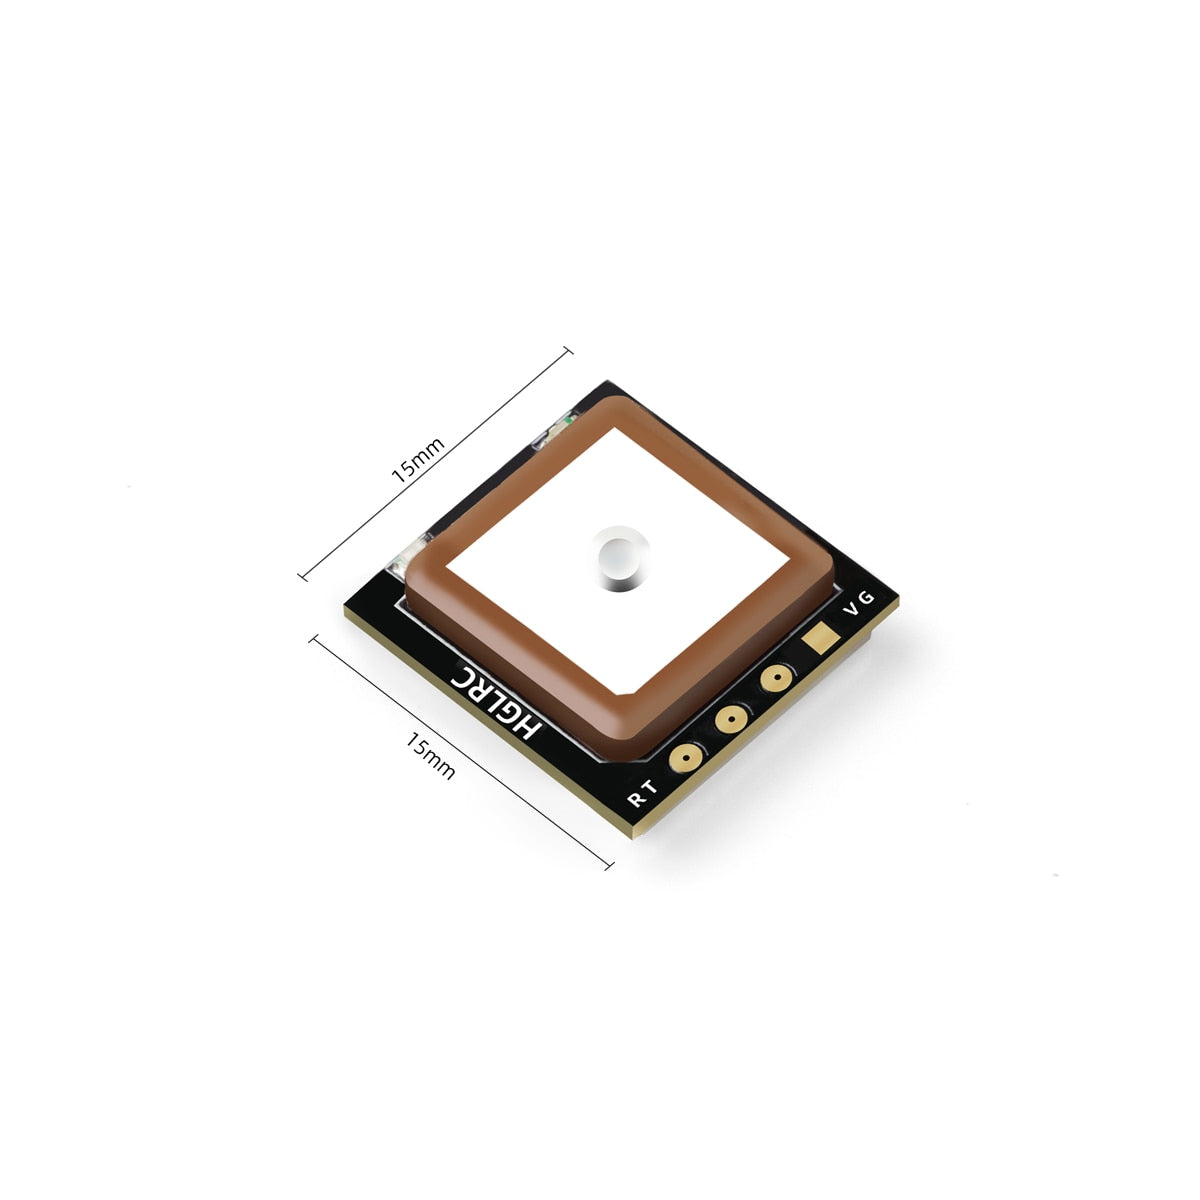 HGLRC M100 MINI GPS 10th Generation UBLOX Chip - three-mode positioning 3.3V-5V For FPV Racing Drone For RC FPV Freestyle Drone